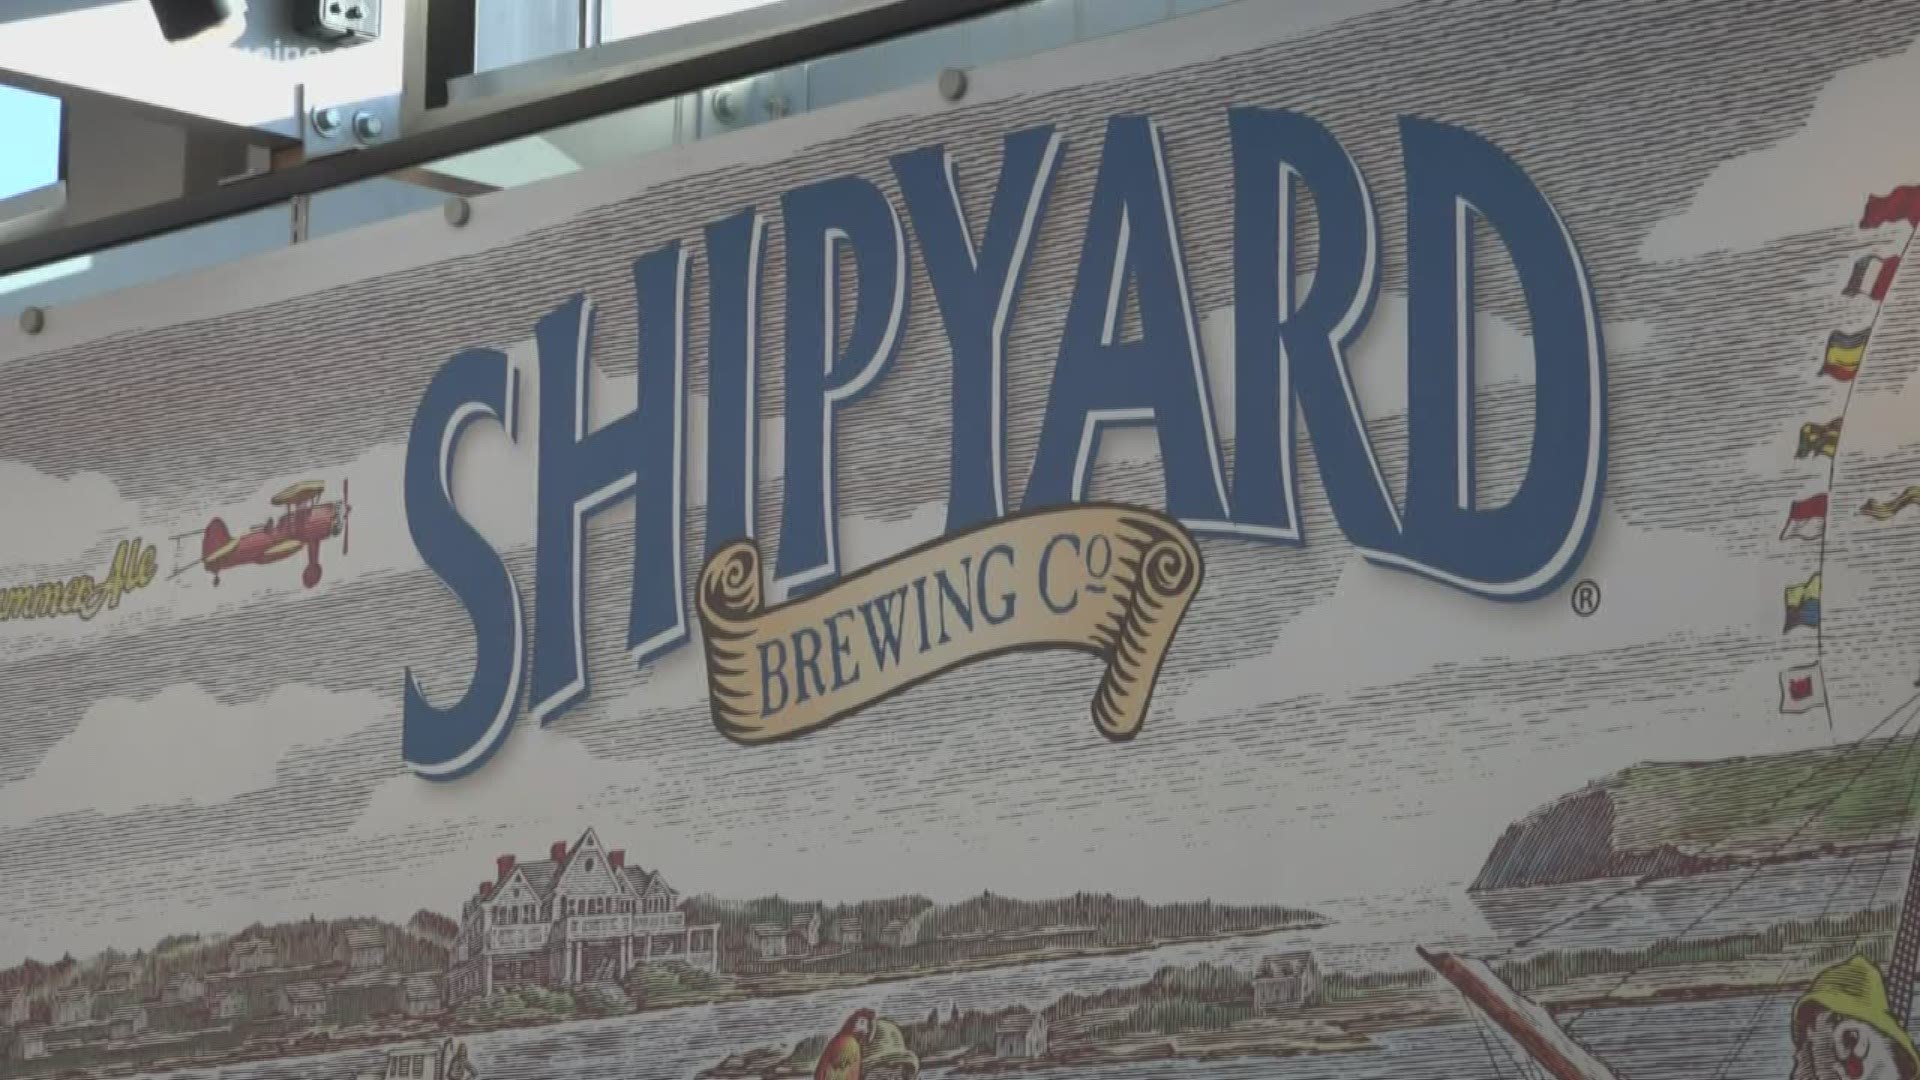 The effort is part of a larger collaboration between Shipyard Brewing Company and Rocks Brewing Company.